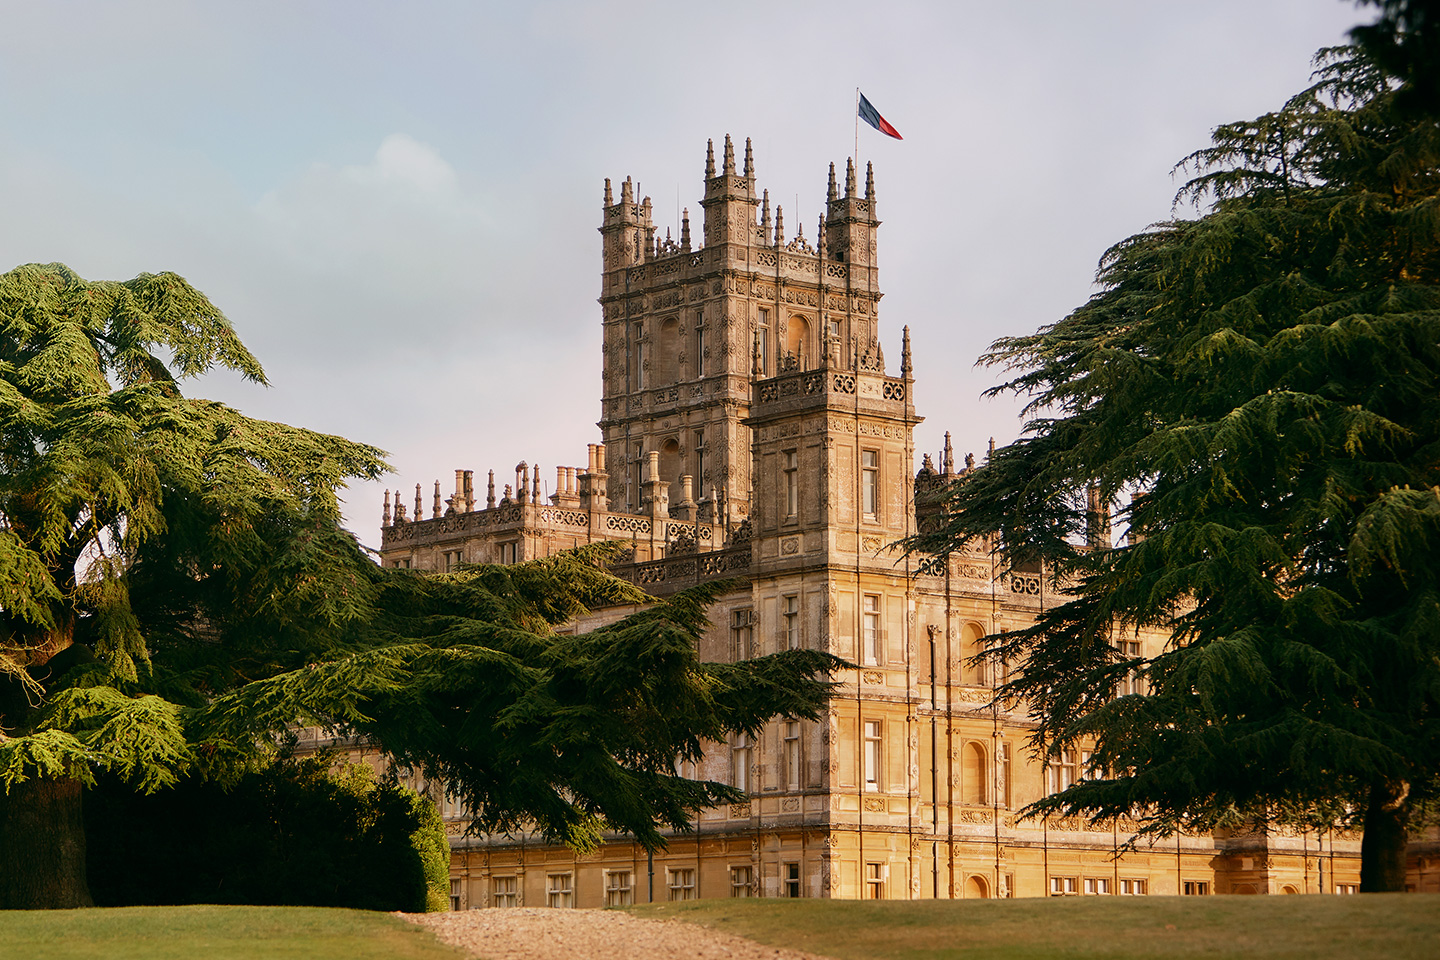 The real life Downton Abbey is available to rent on Airbnb for a once in a lifetime experience